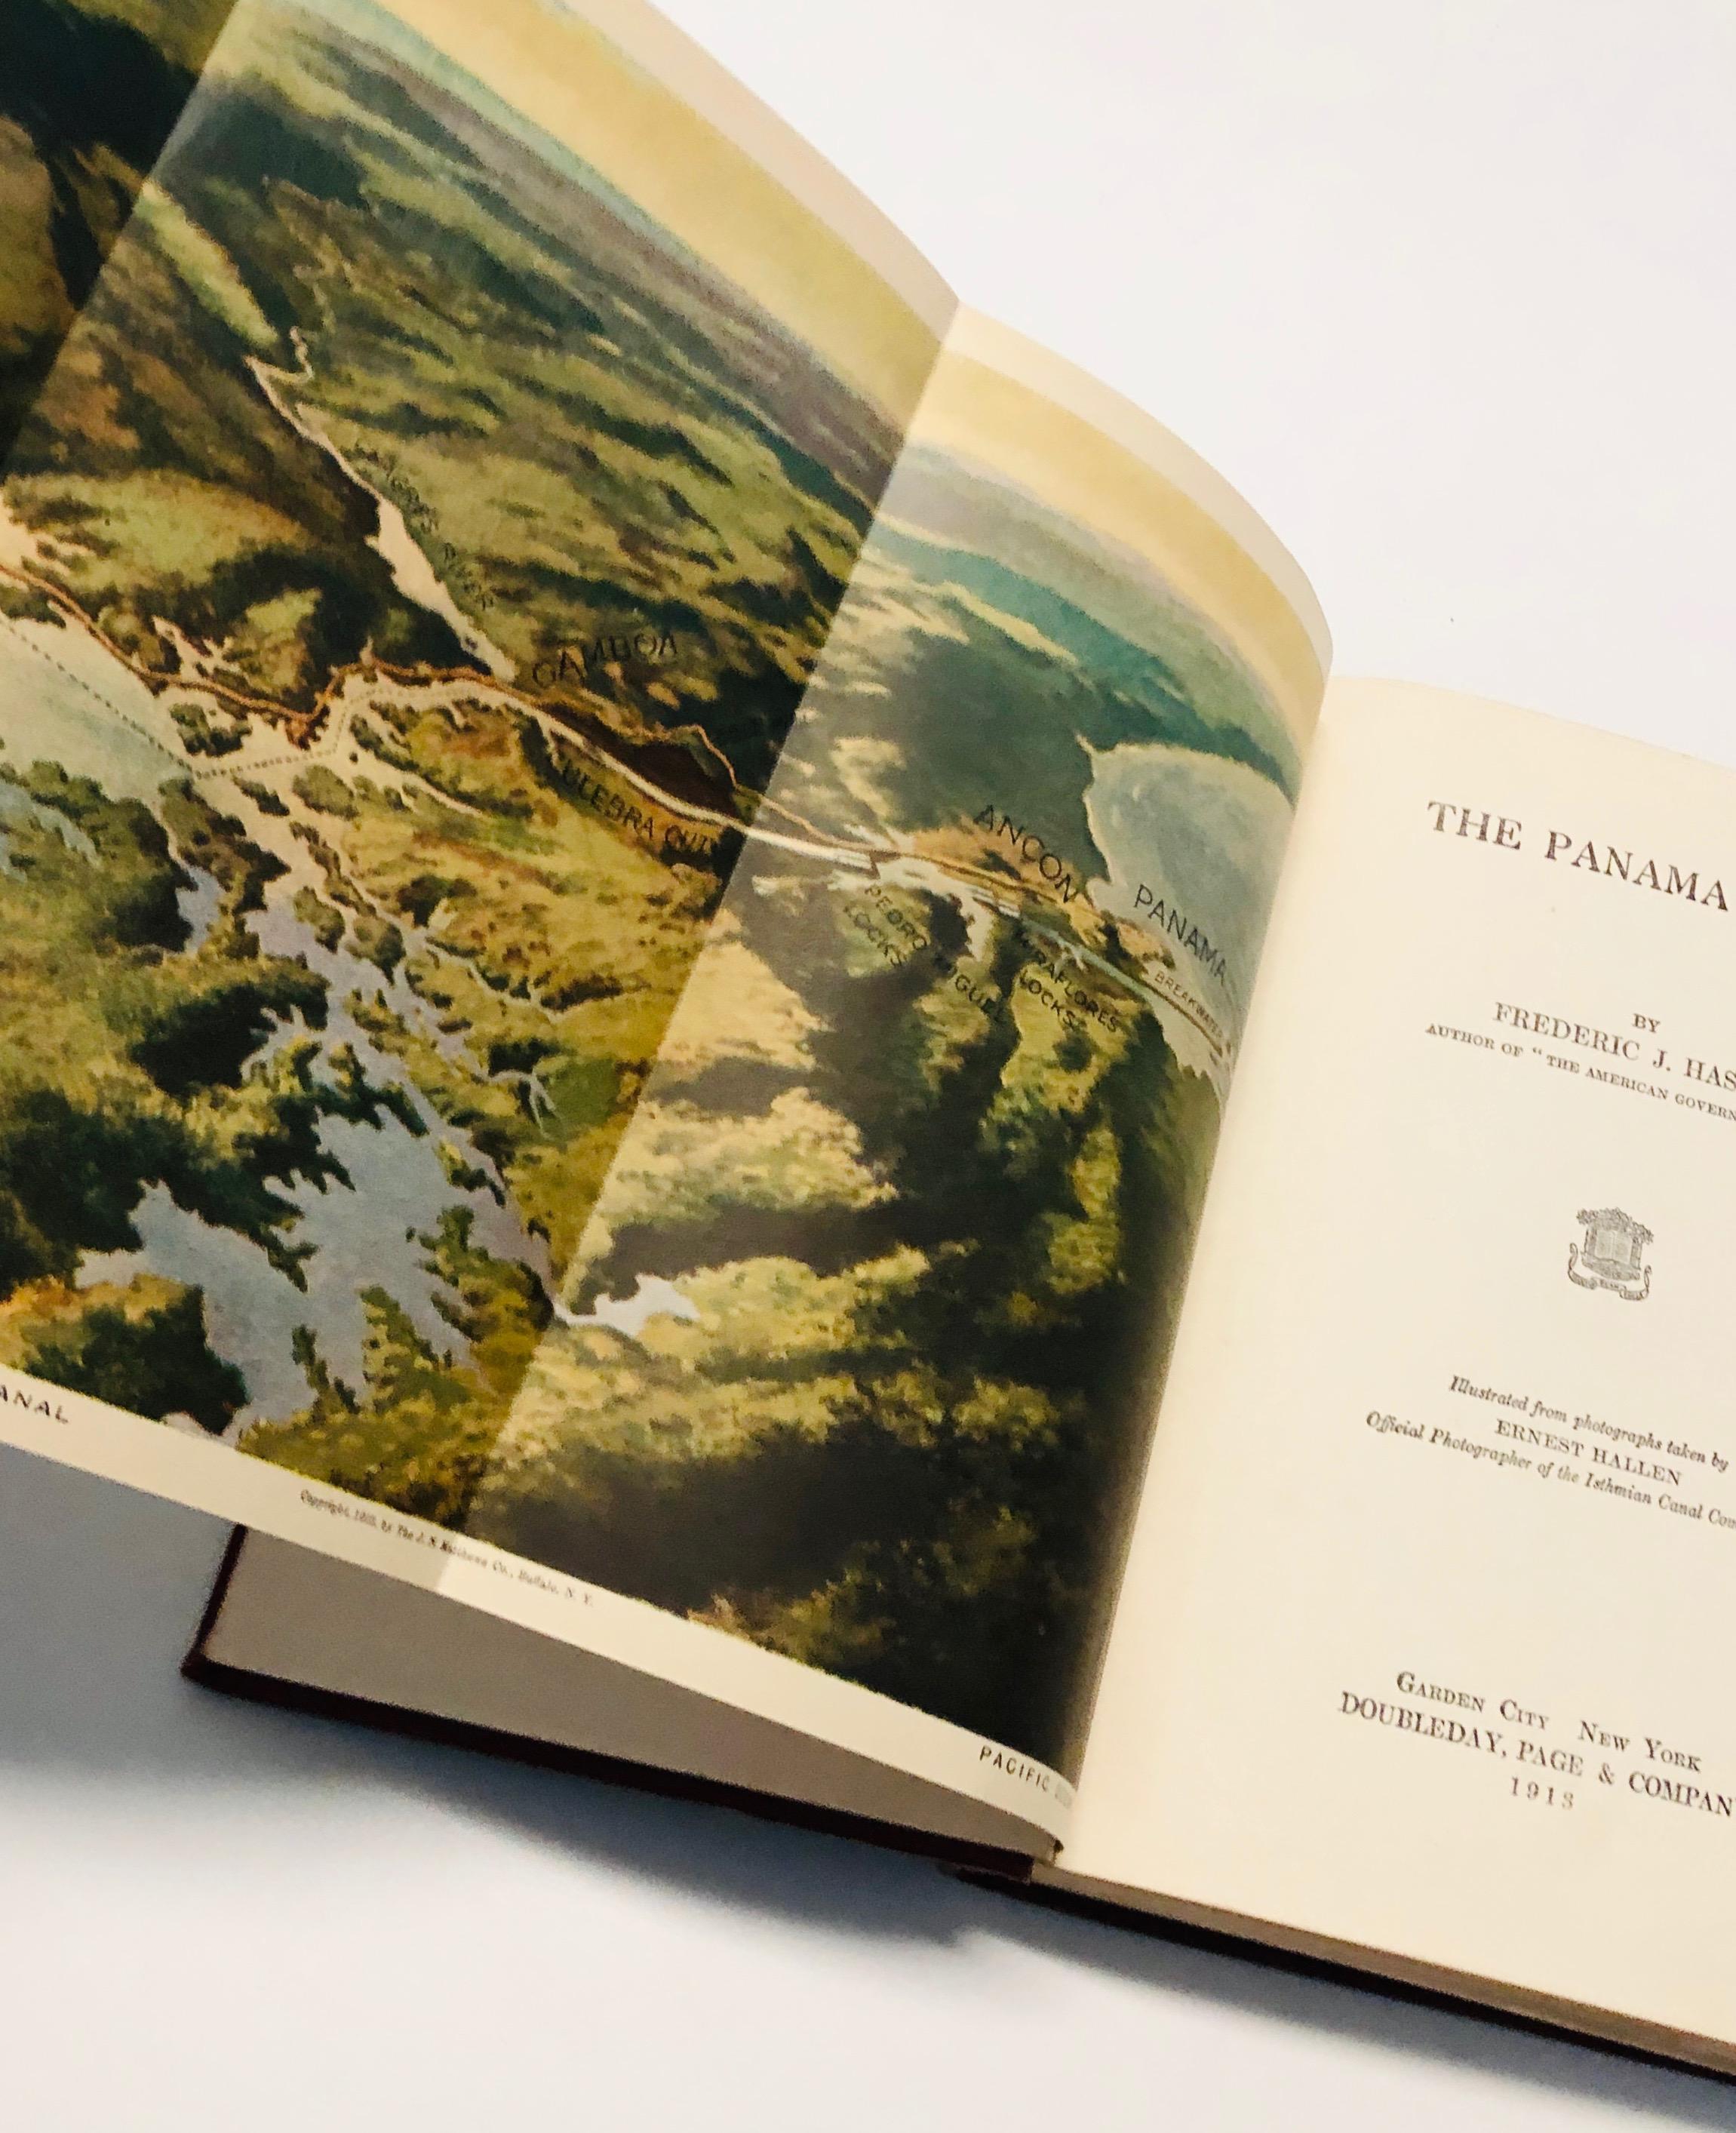 The Panama Canal by Frederic J. Haskin (1913) with Color Map